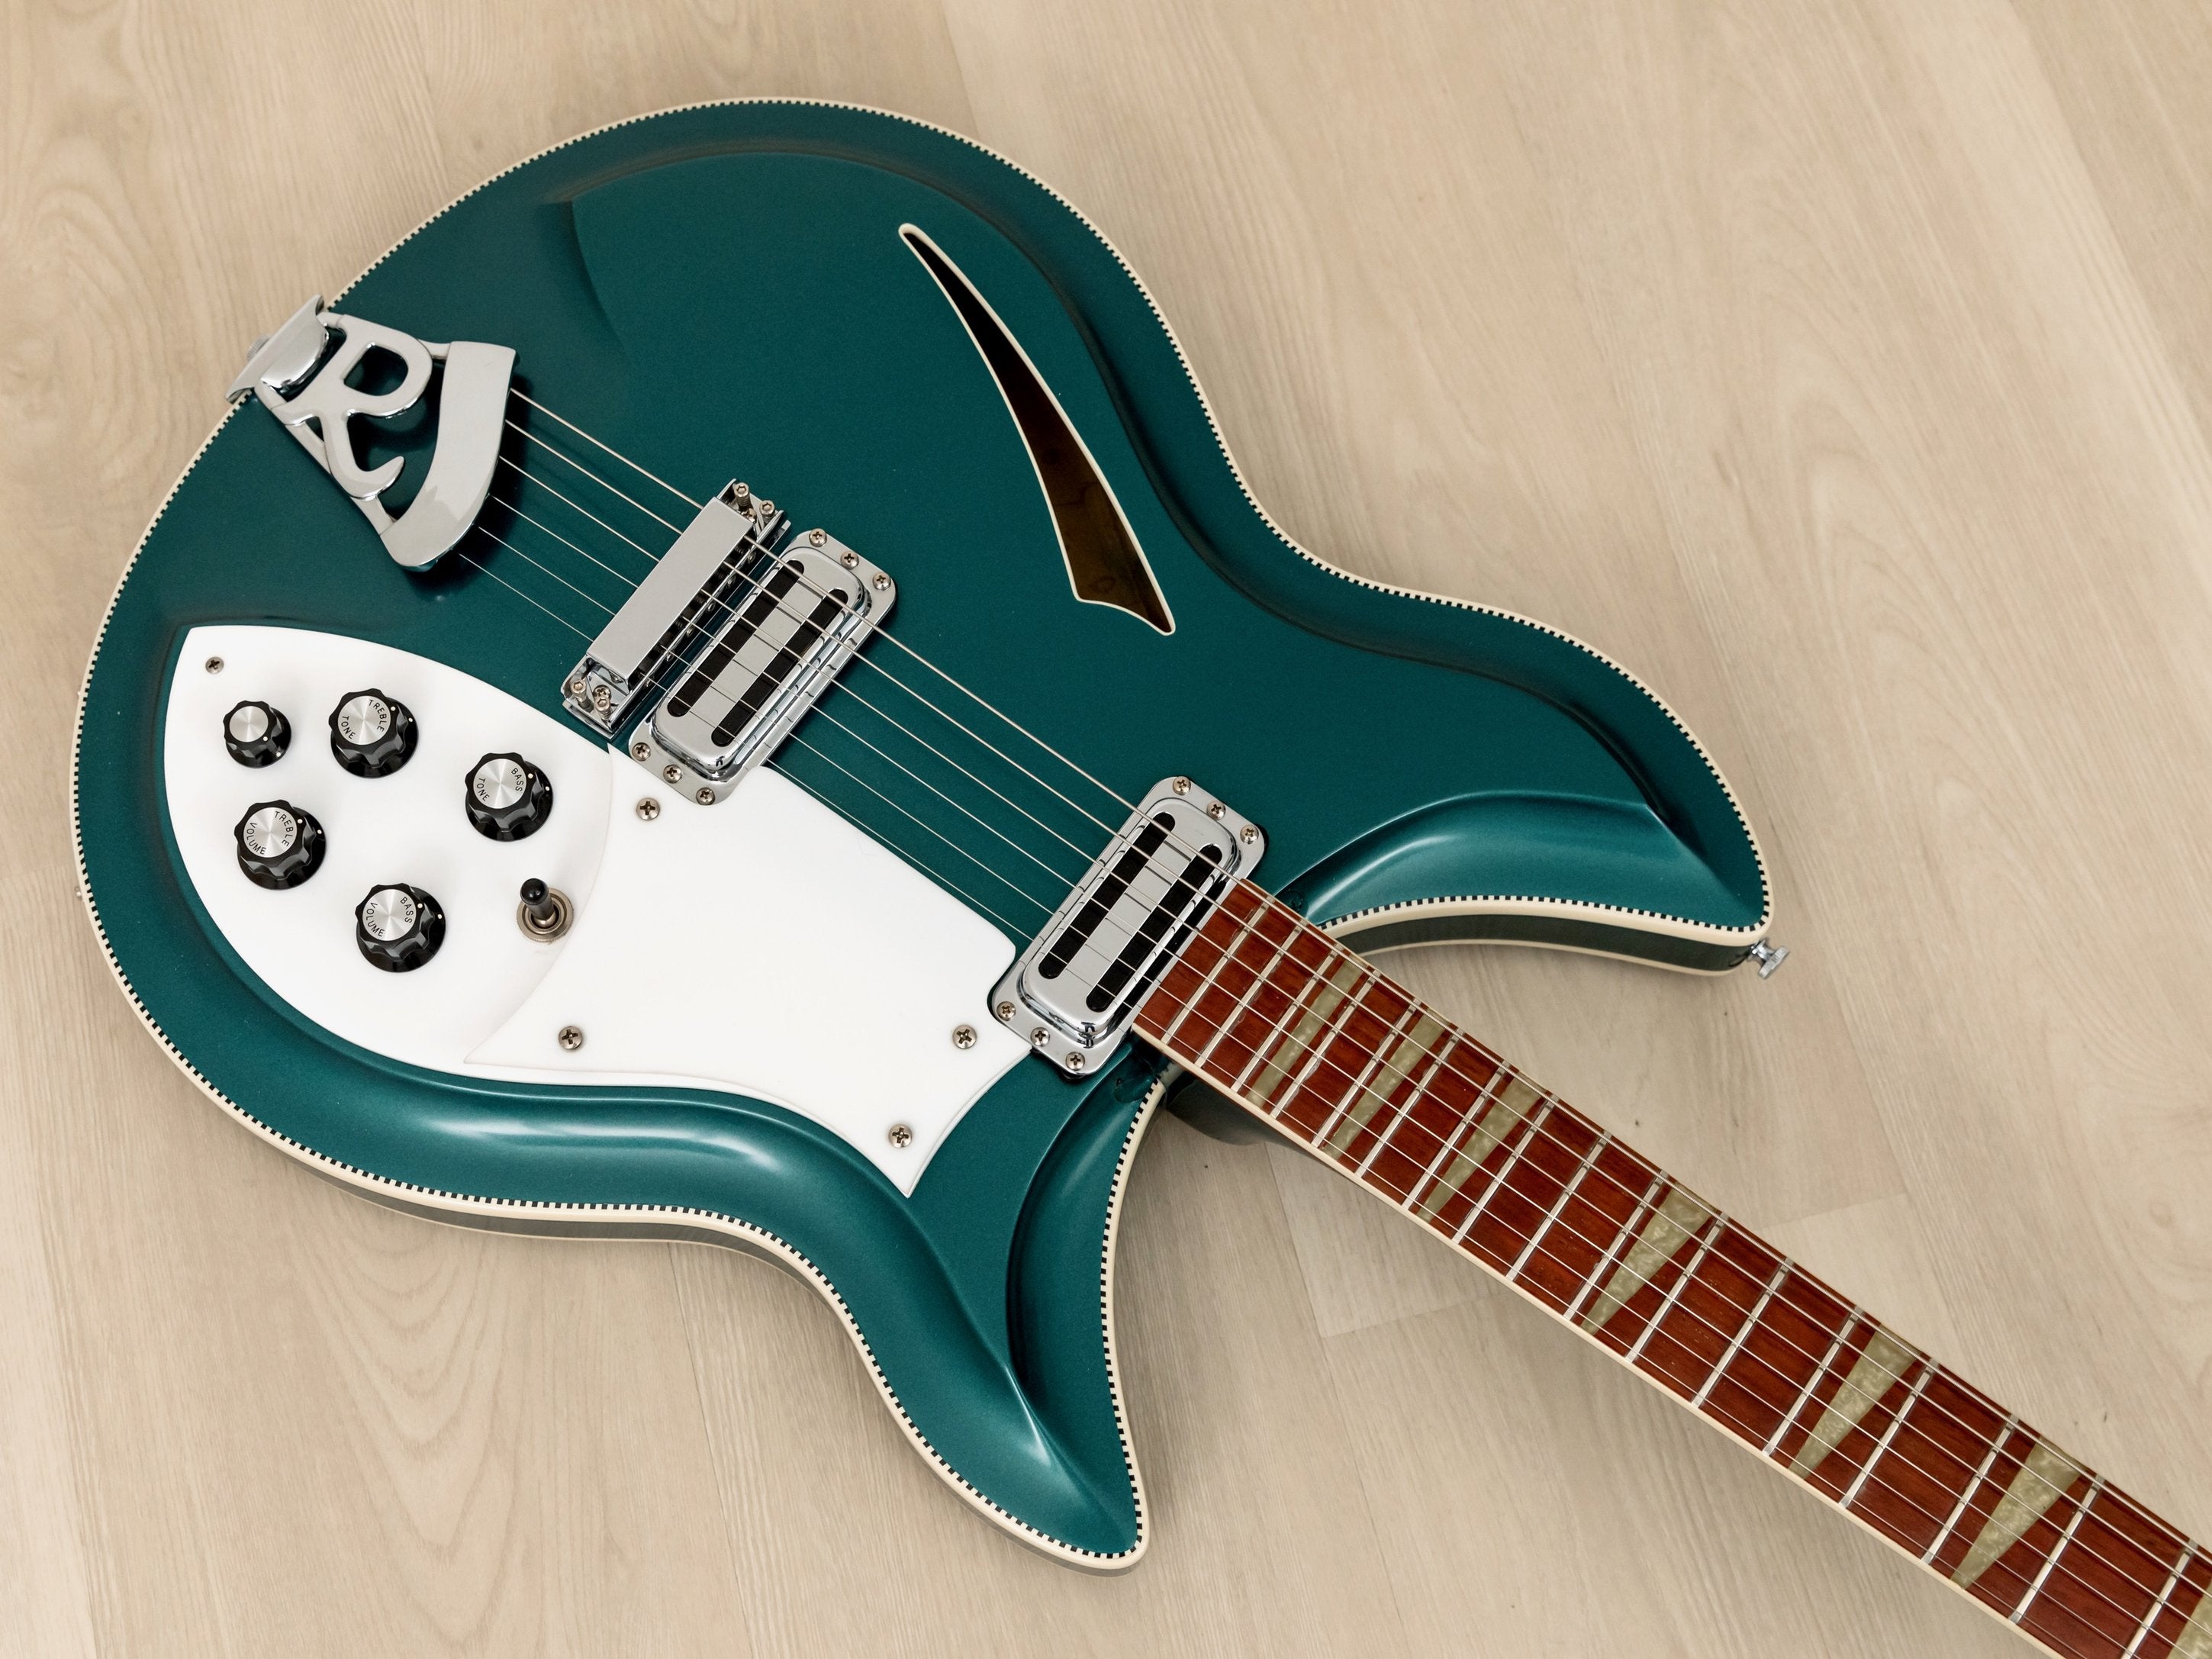 1993 Rickenbacker 381V69 Turquoise Custom Color Electric Guitar w/ Hangtags & Case